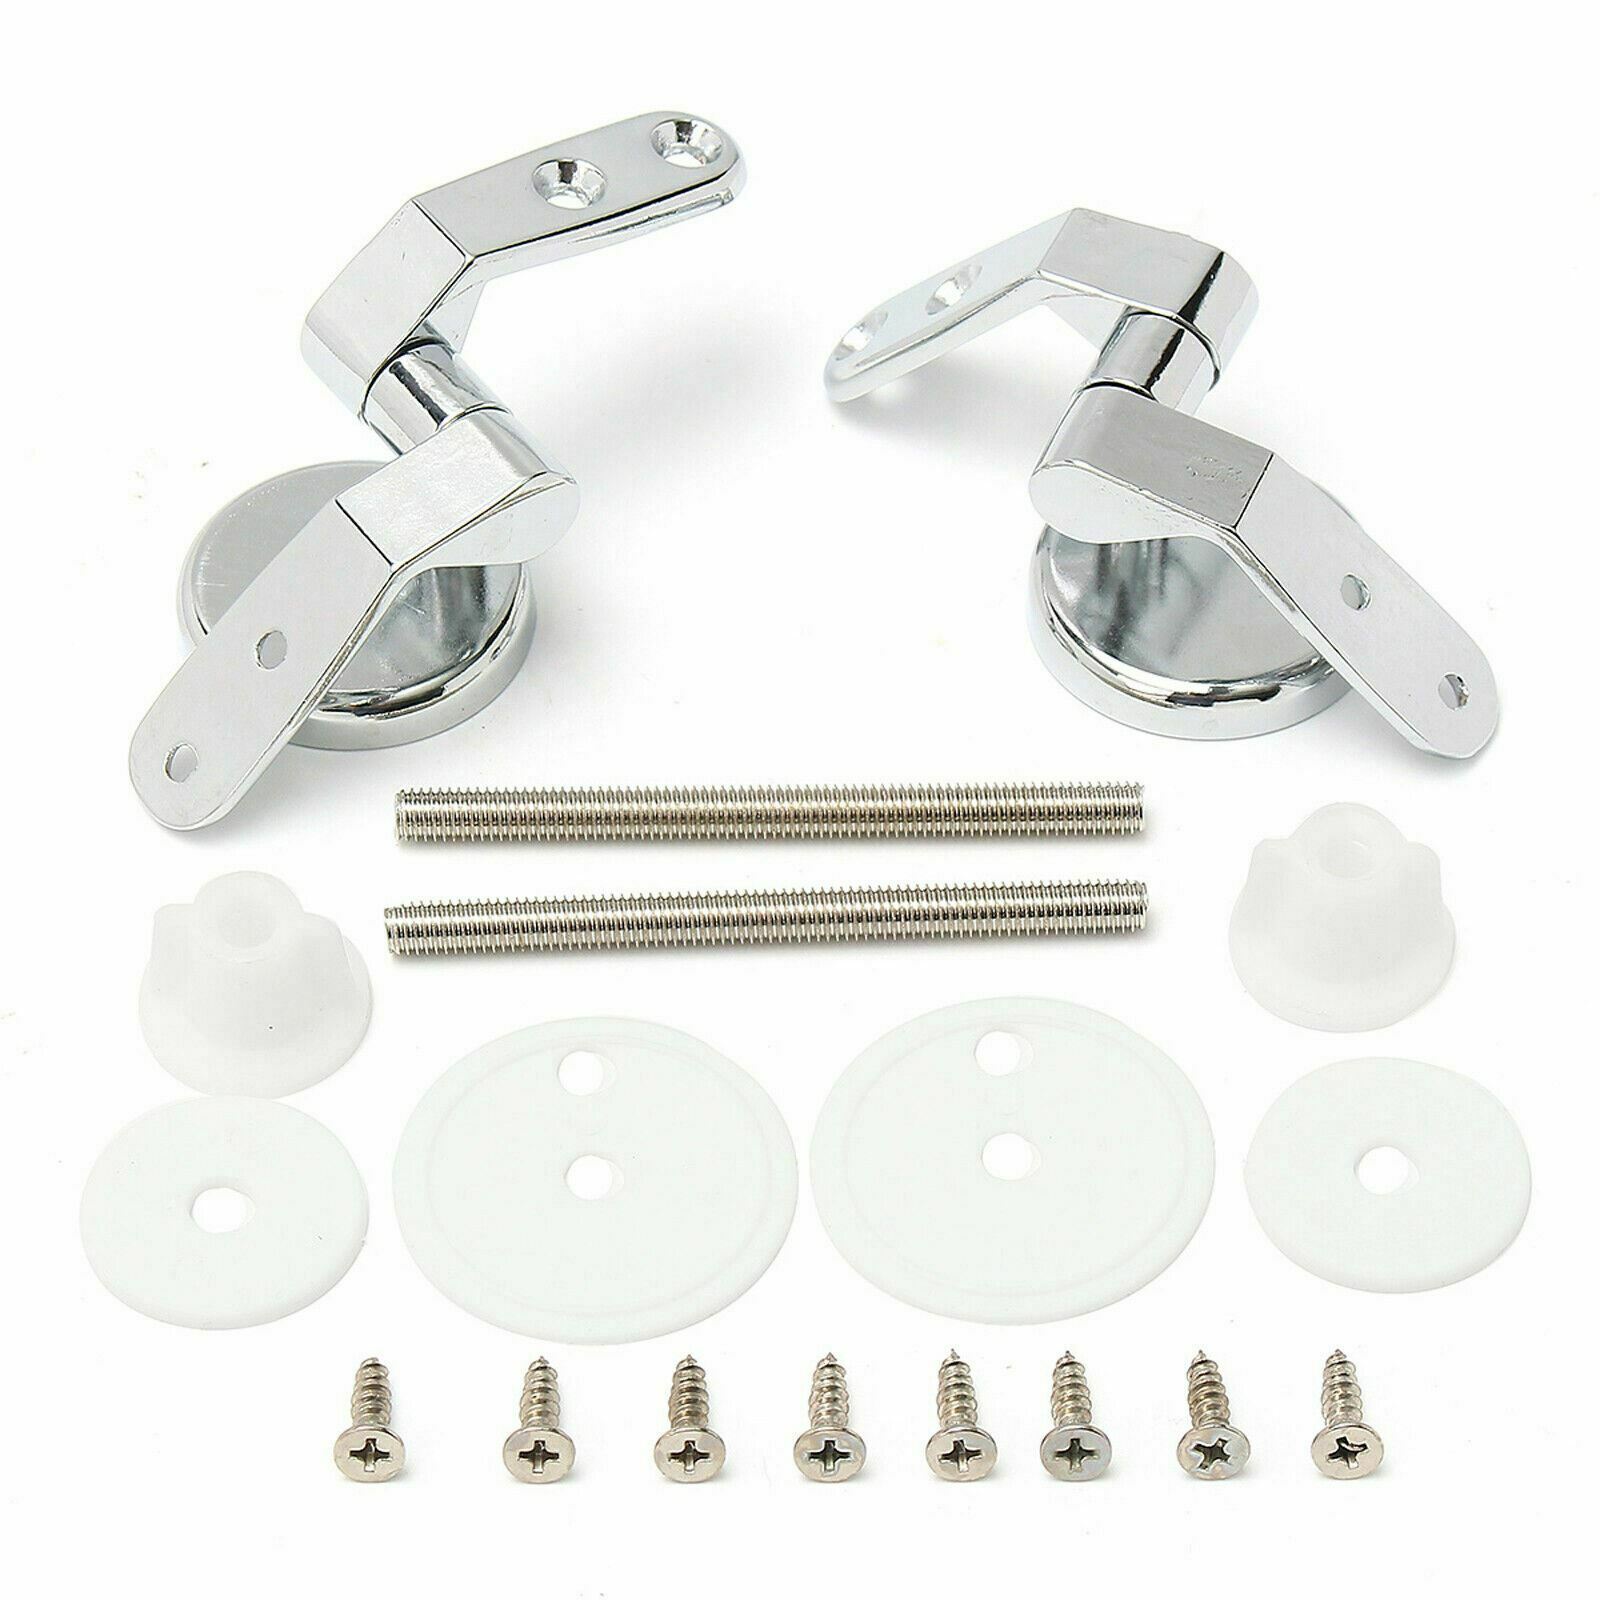 2Pcs Universal Chrome Stainless Steel Toilet Seat Cover Bar Hinges Fitting Set